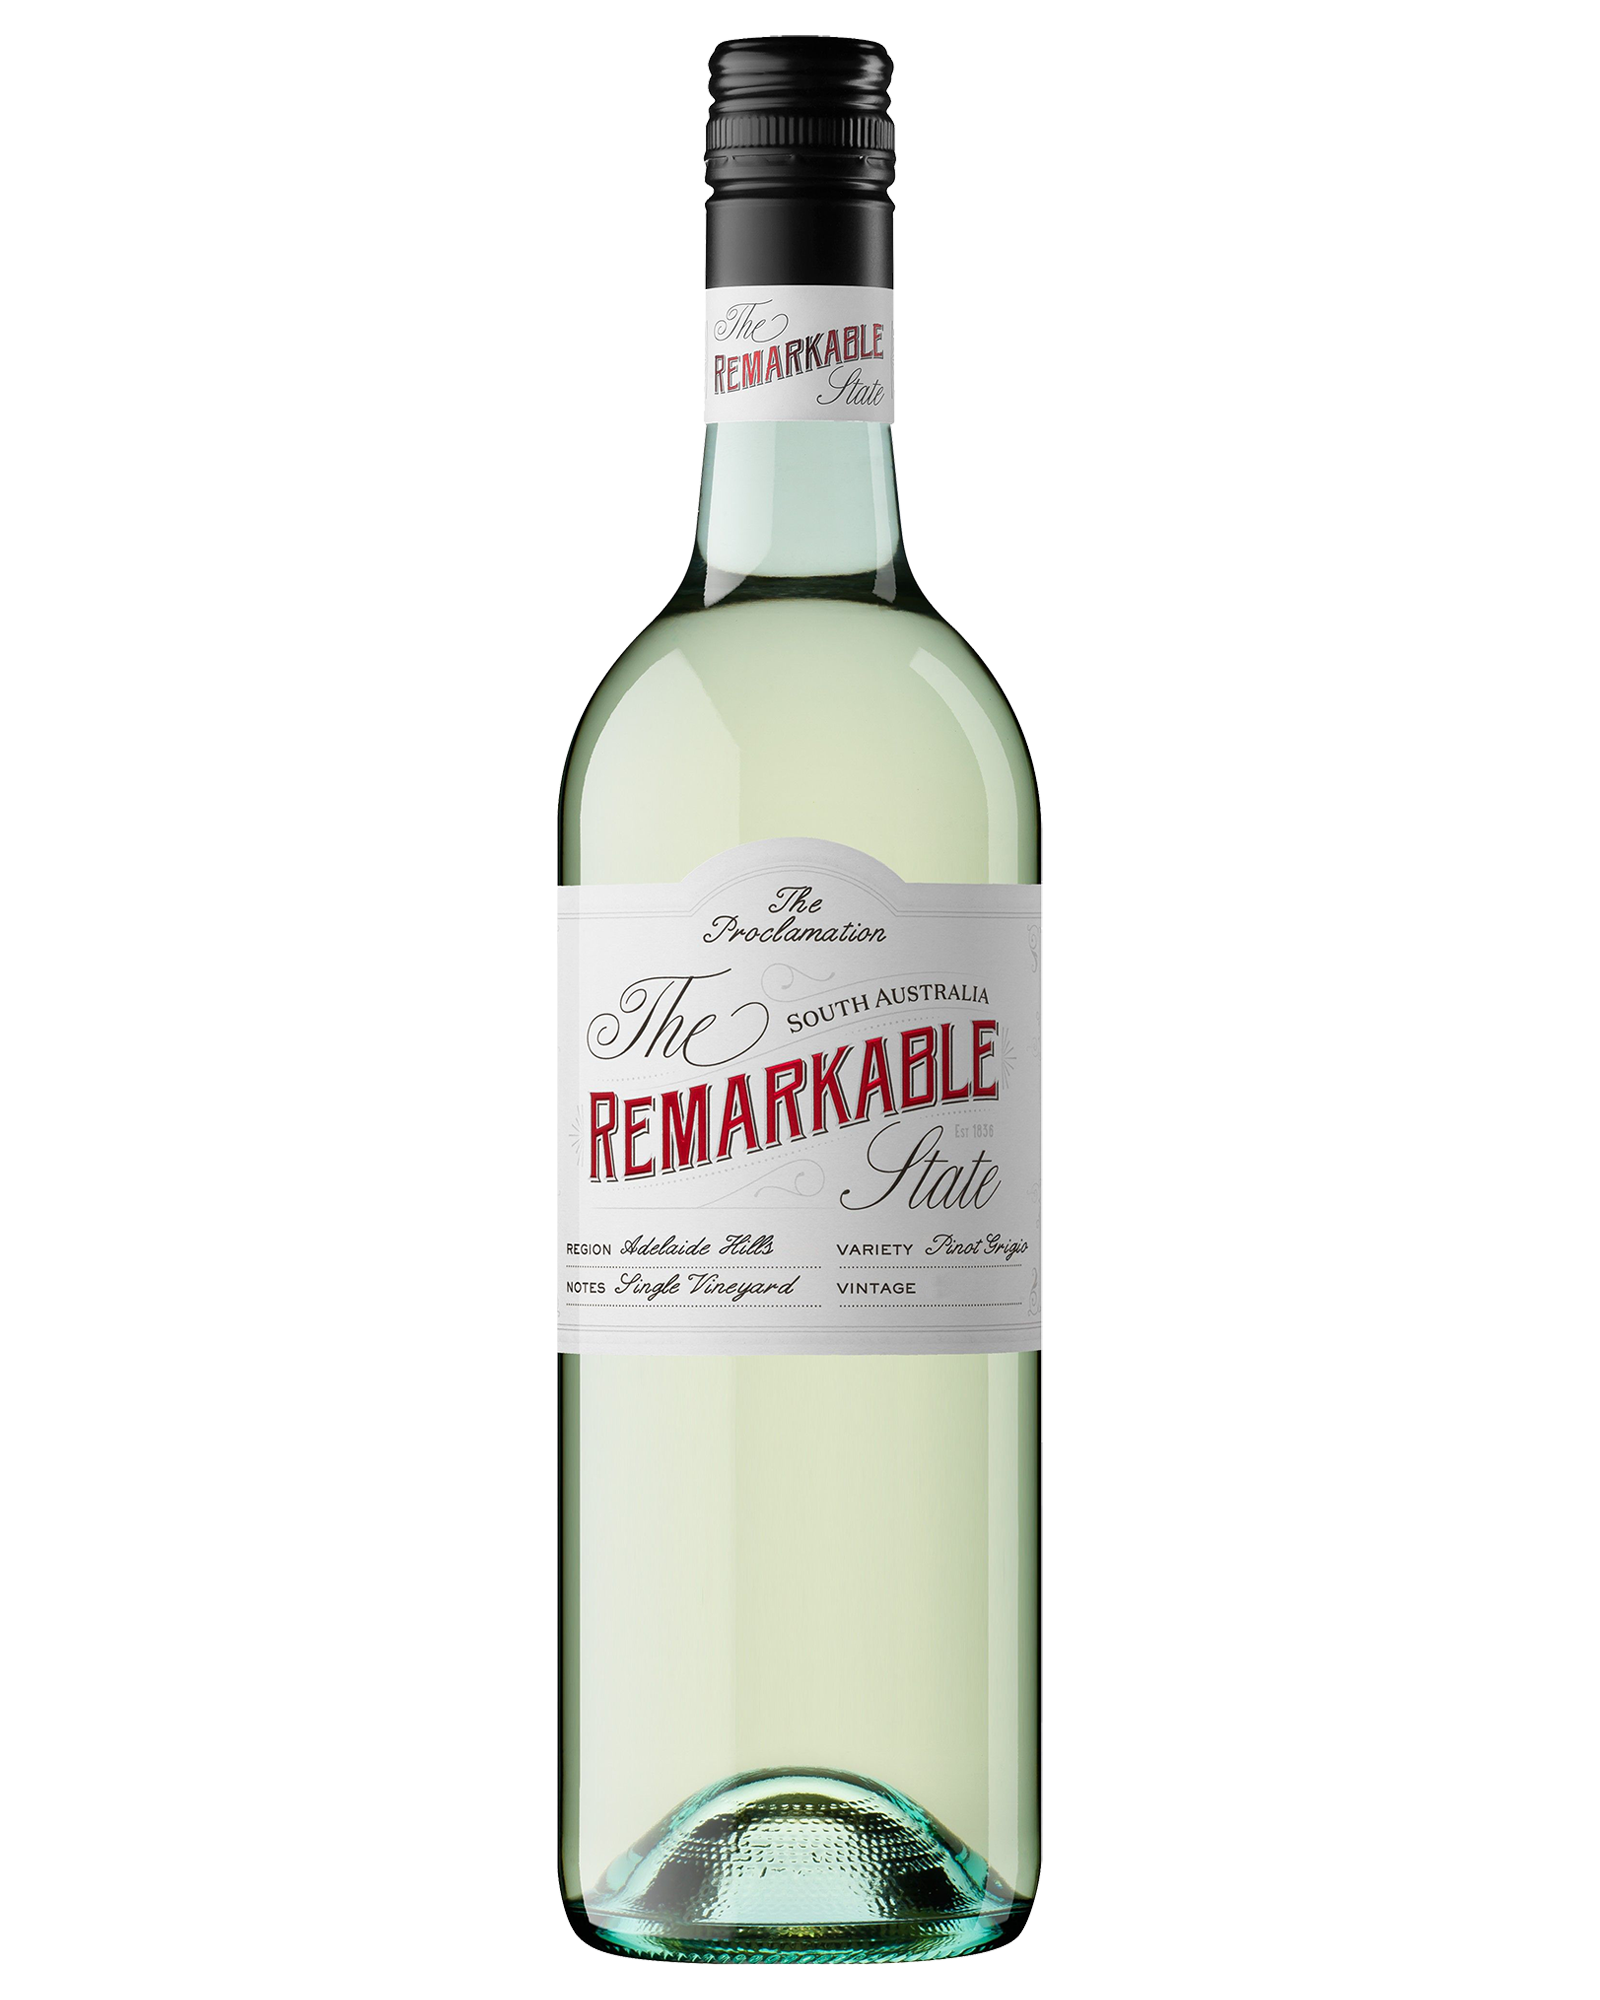 The Remarkable State Proclamation Single Vineyard Adelaide Hills Pinot Grigio 2018